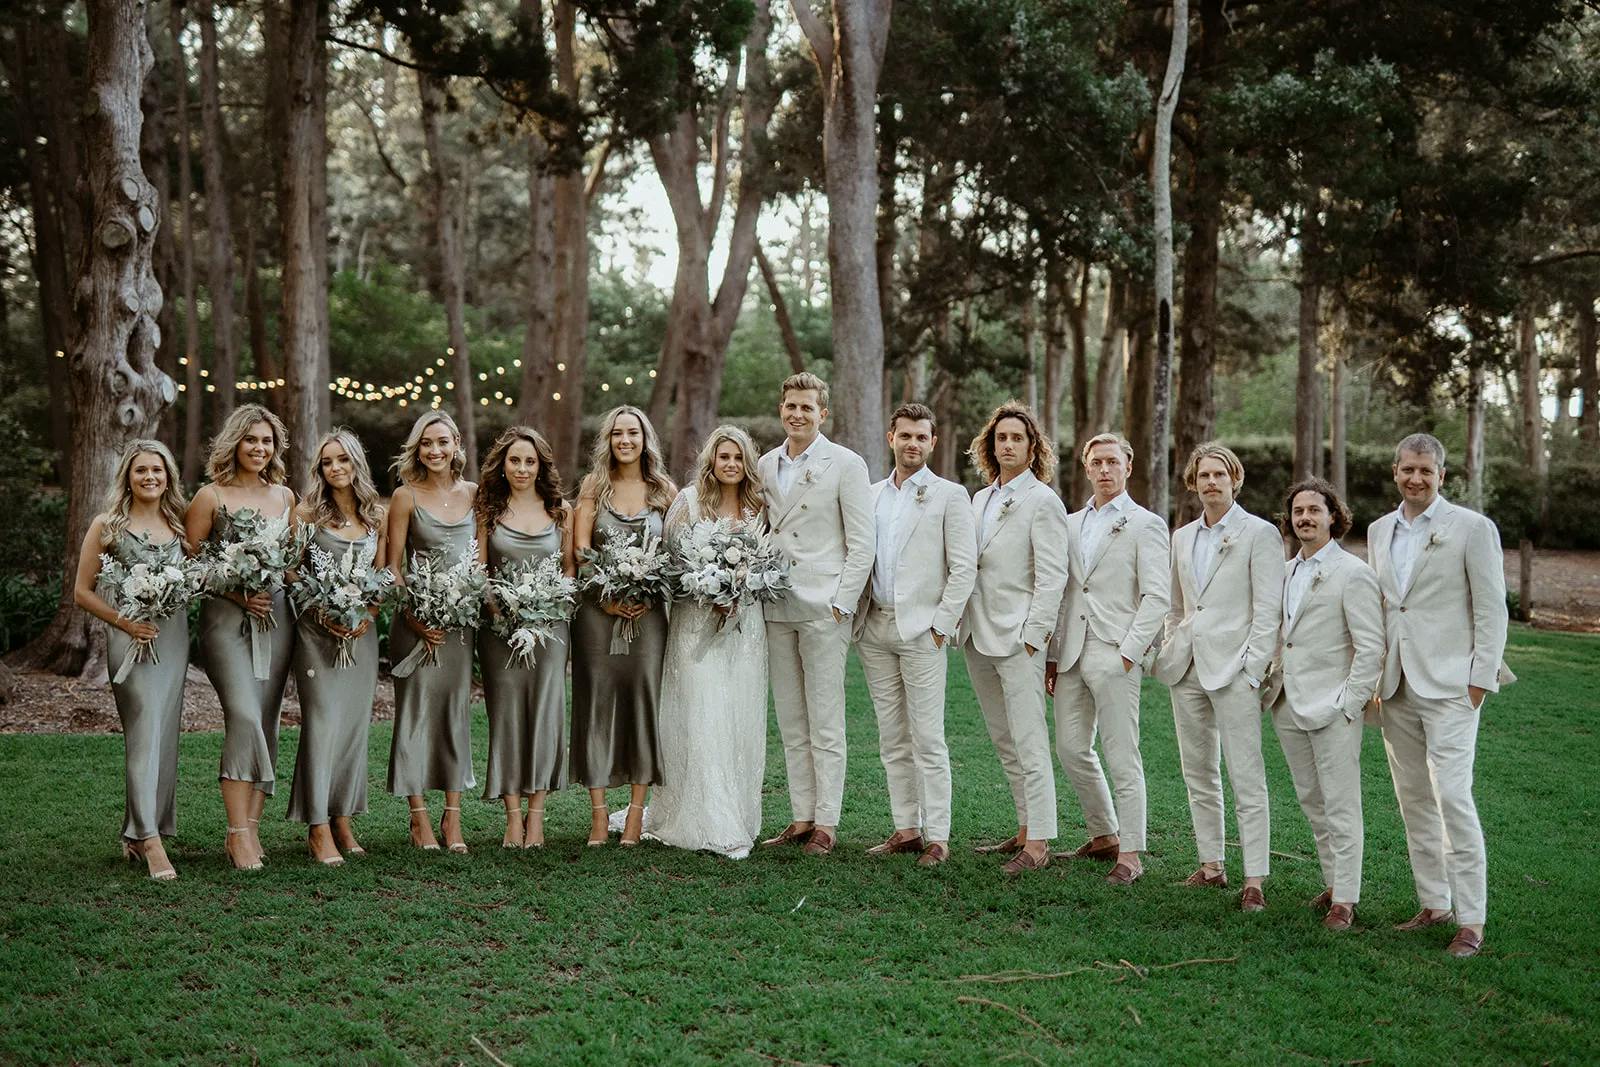 A wedding party stands outdoors on green grass with a backdrop of trees and string lights. The bridesmaids wear matching silver dresses, and the groomsmen wear light beige suits. The bride, in a white gown, and the groom, in a matching suit, stand in the center.